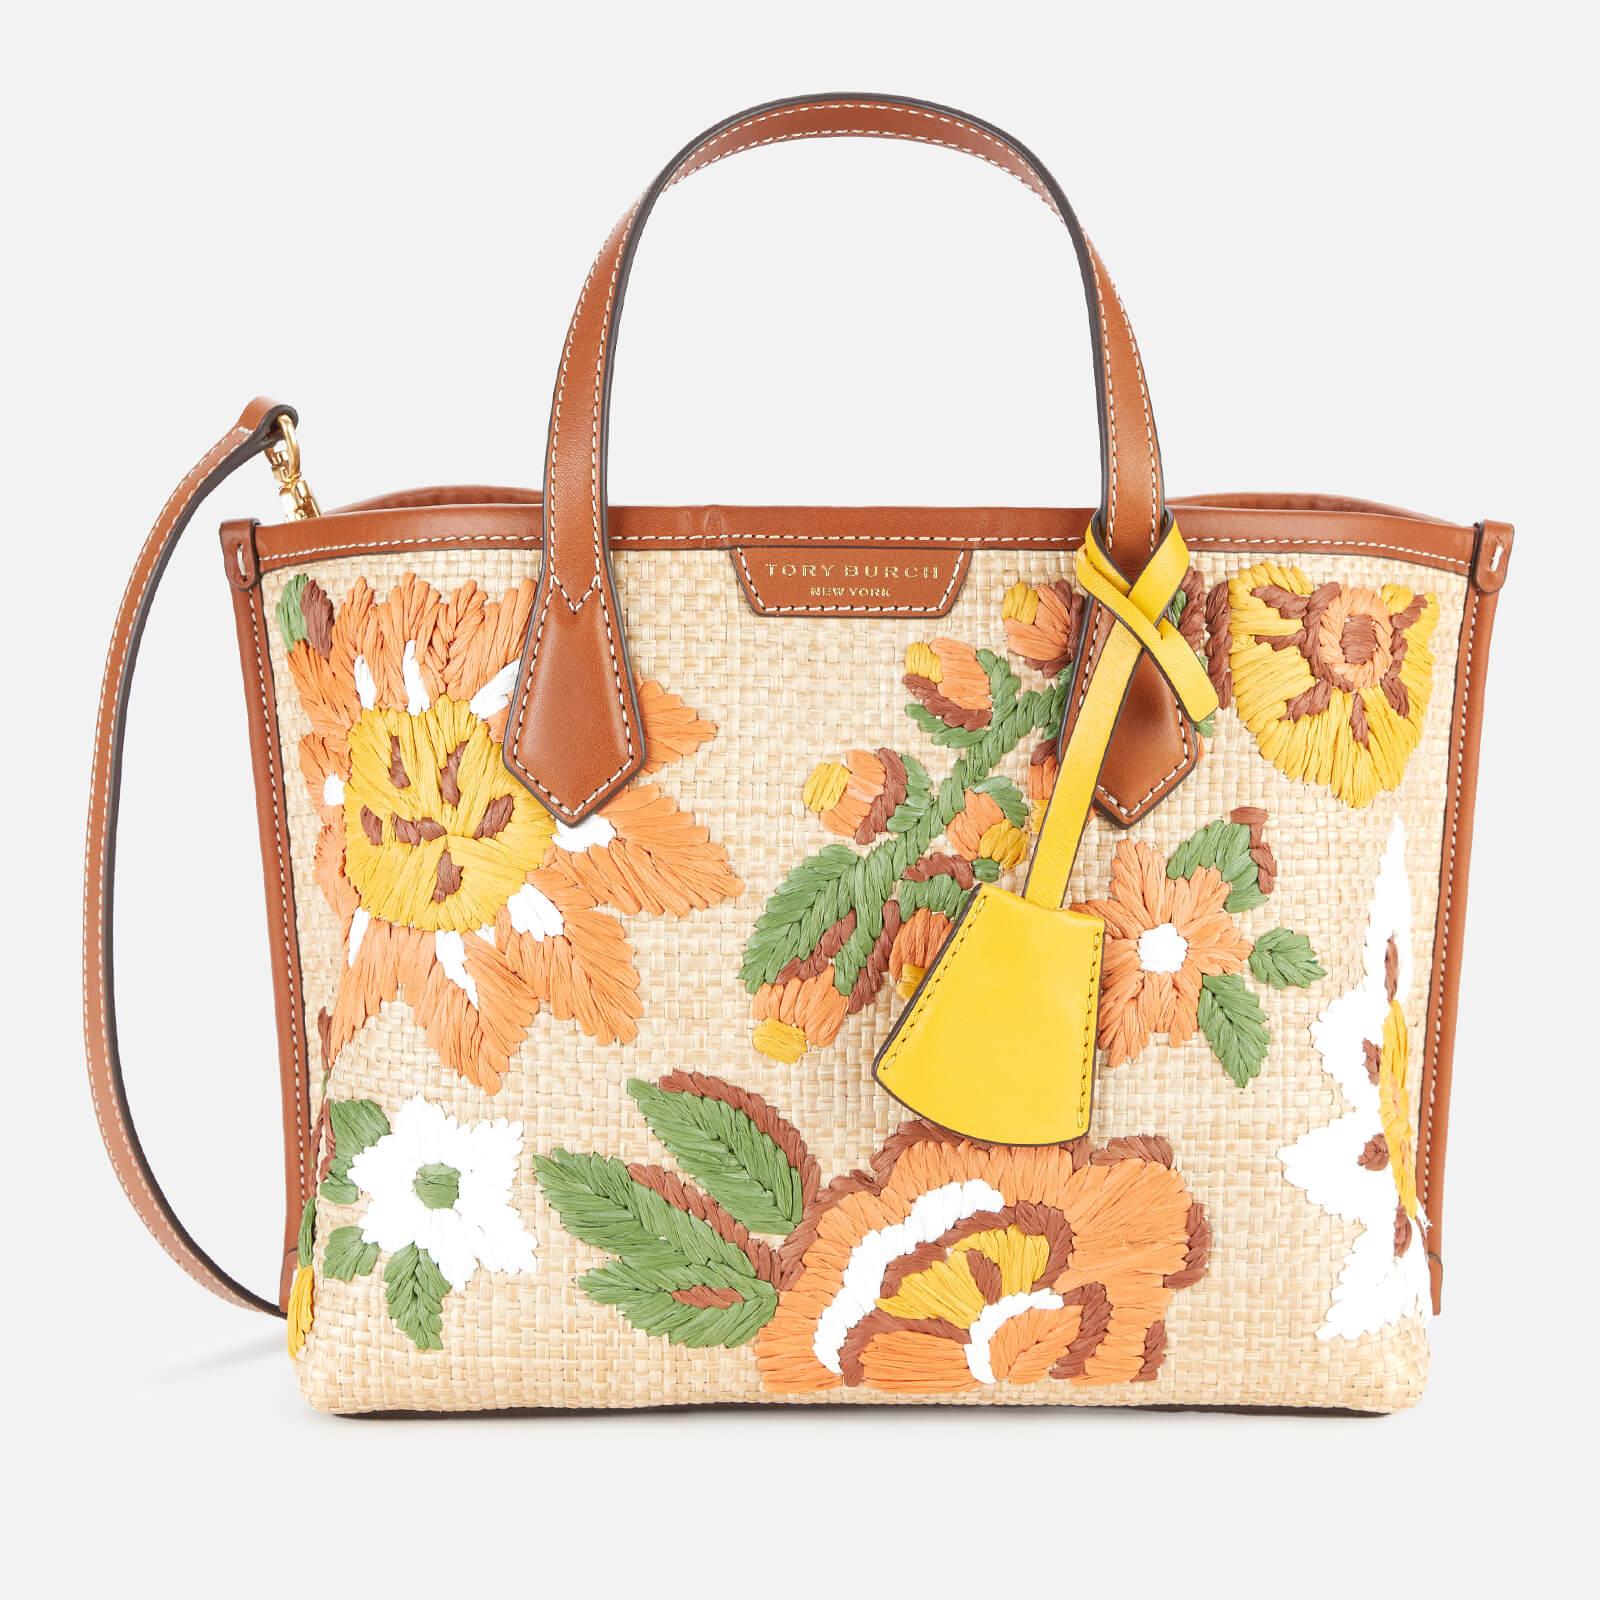 Tory Burch Women's Small Perry Tote Bag - Natural - Totes